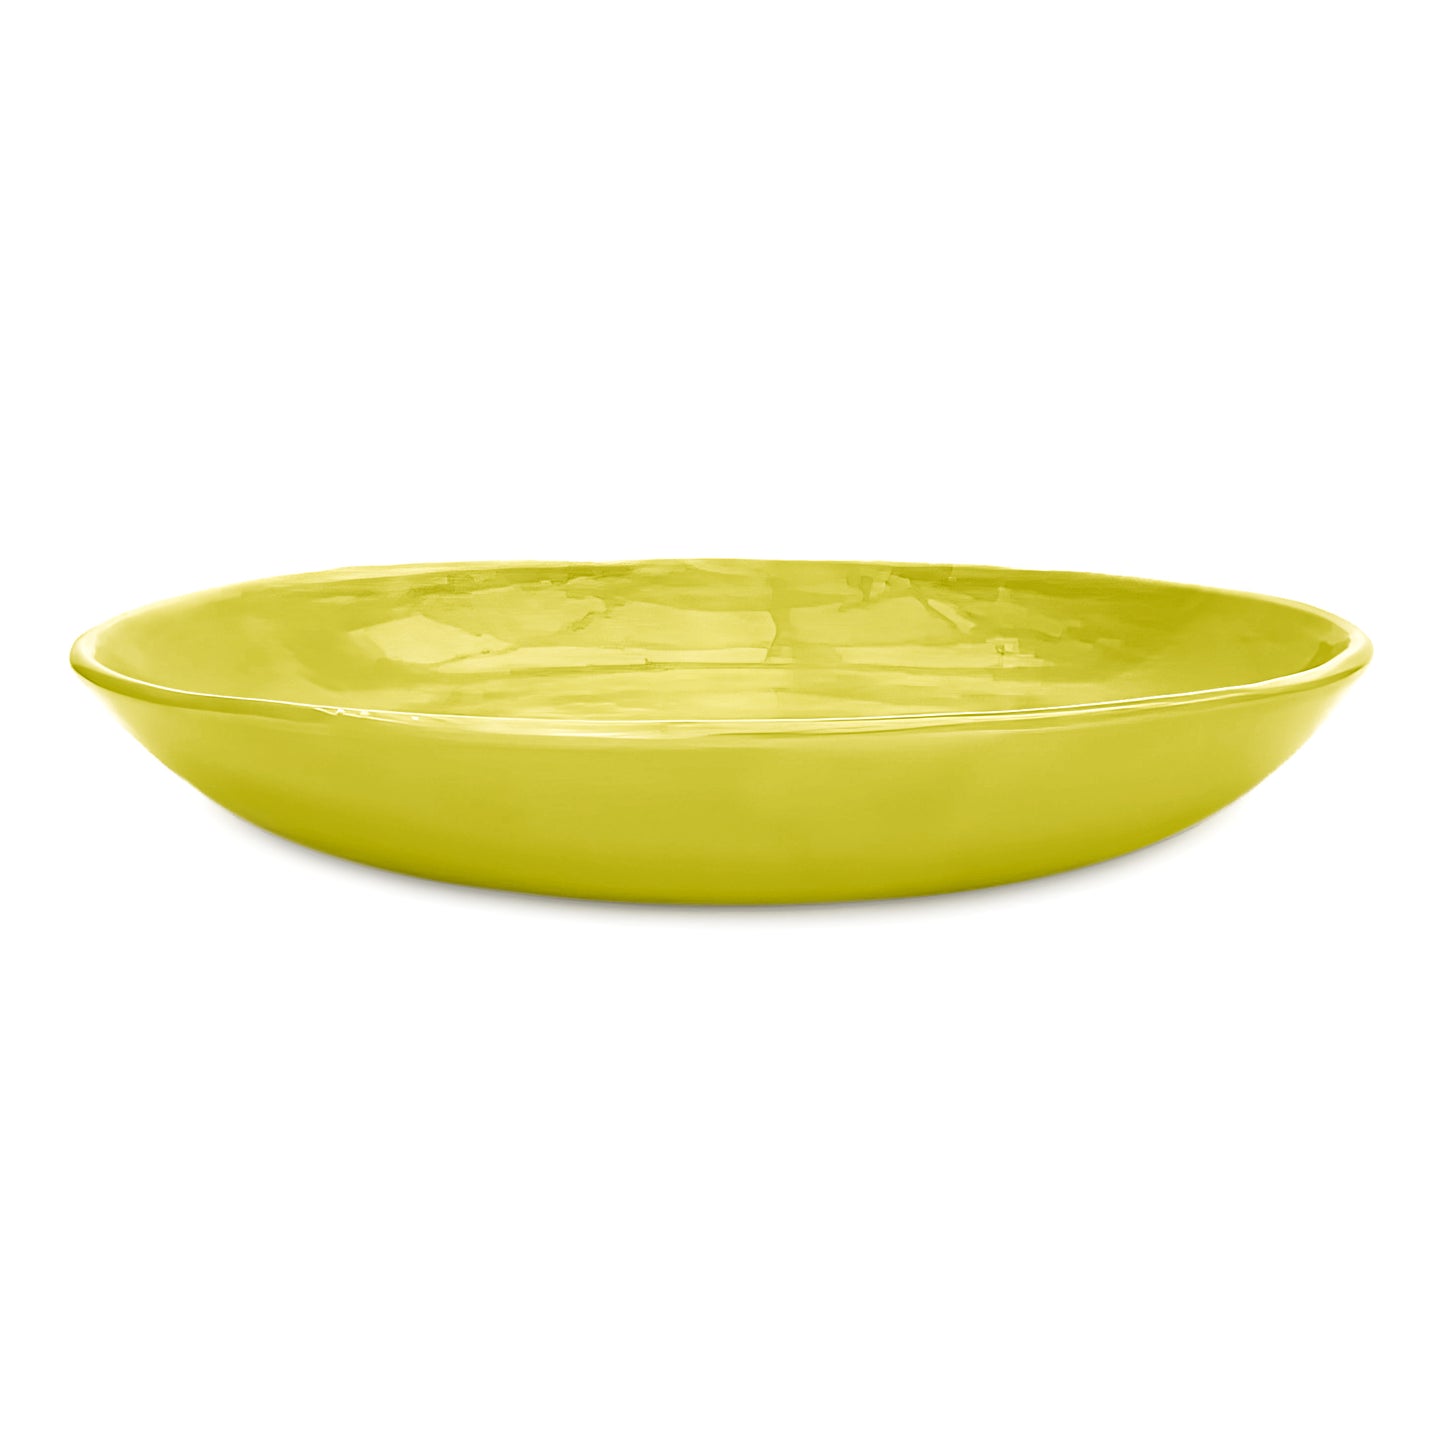 LARGE DISH CHARTREUSE